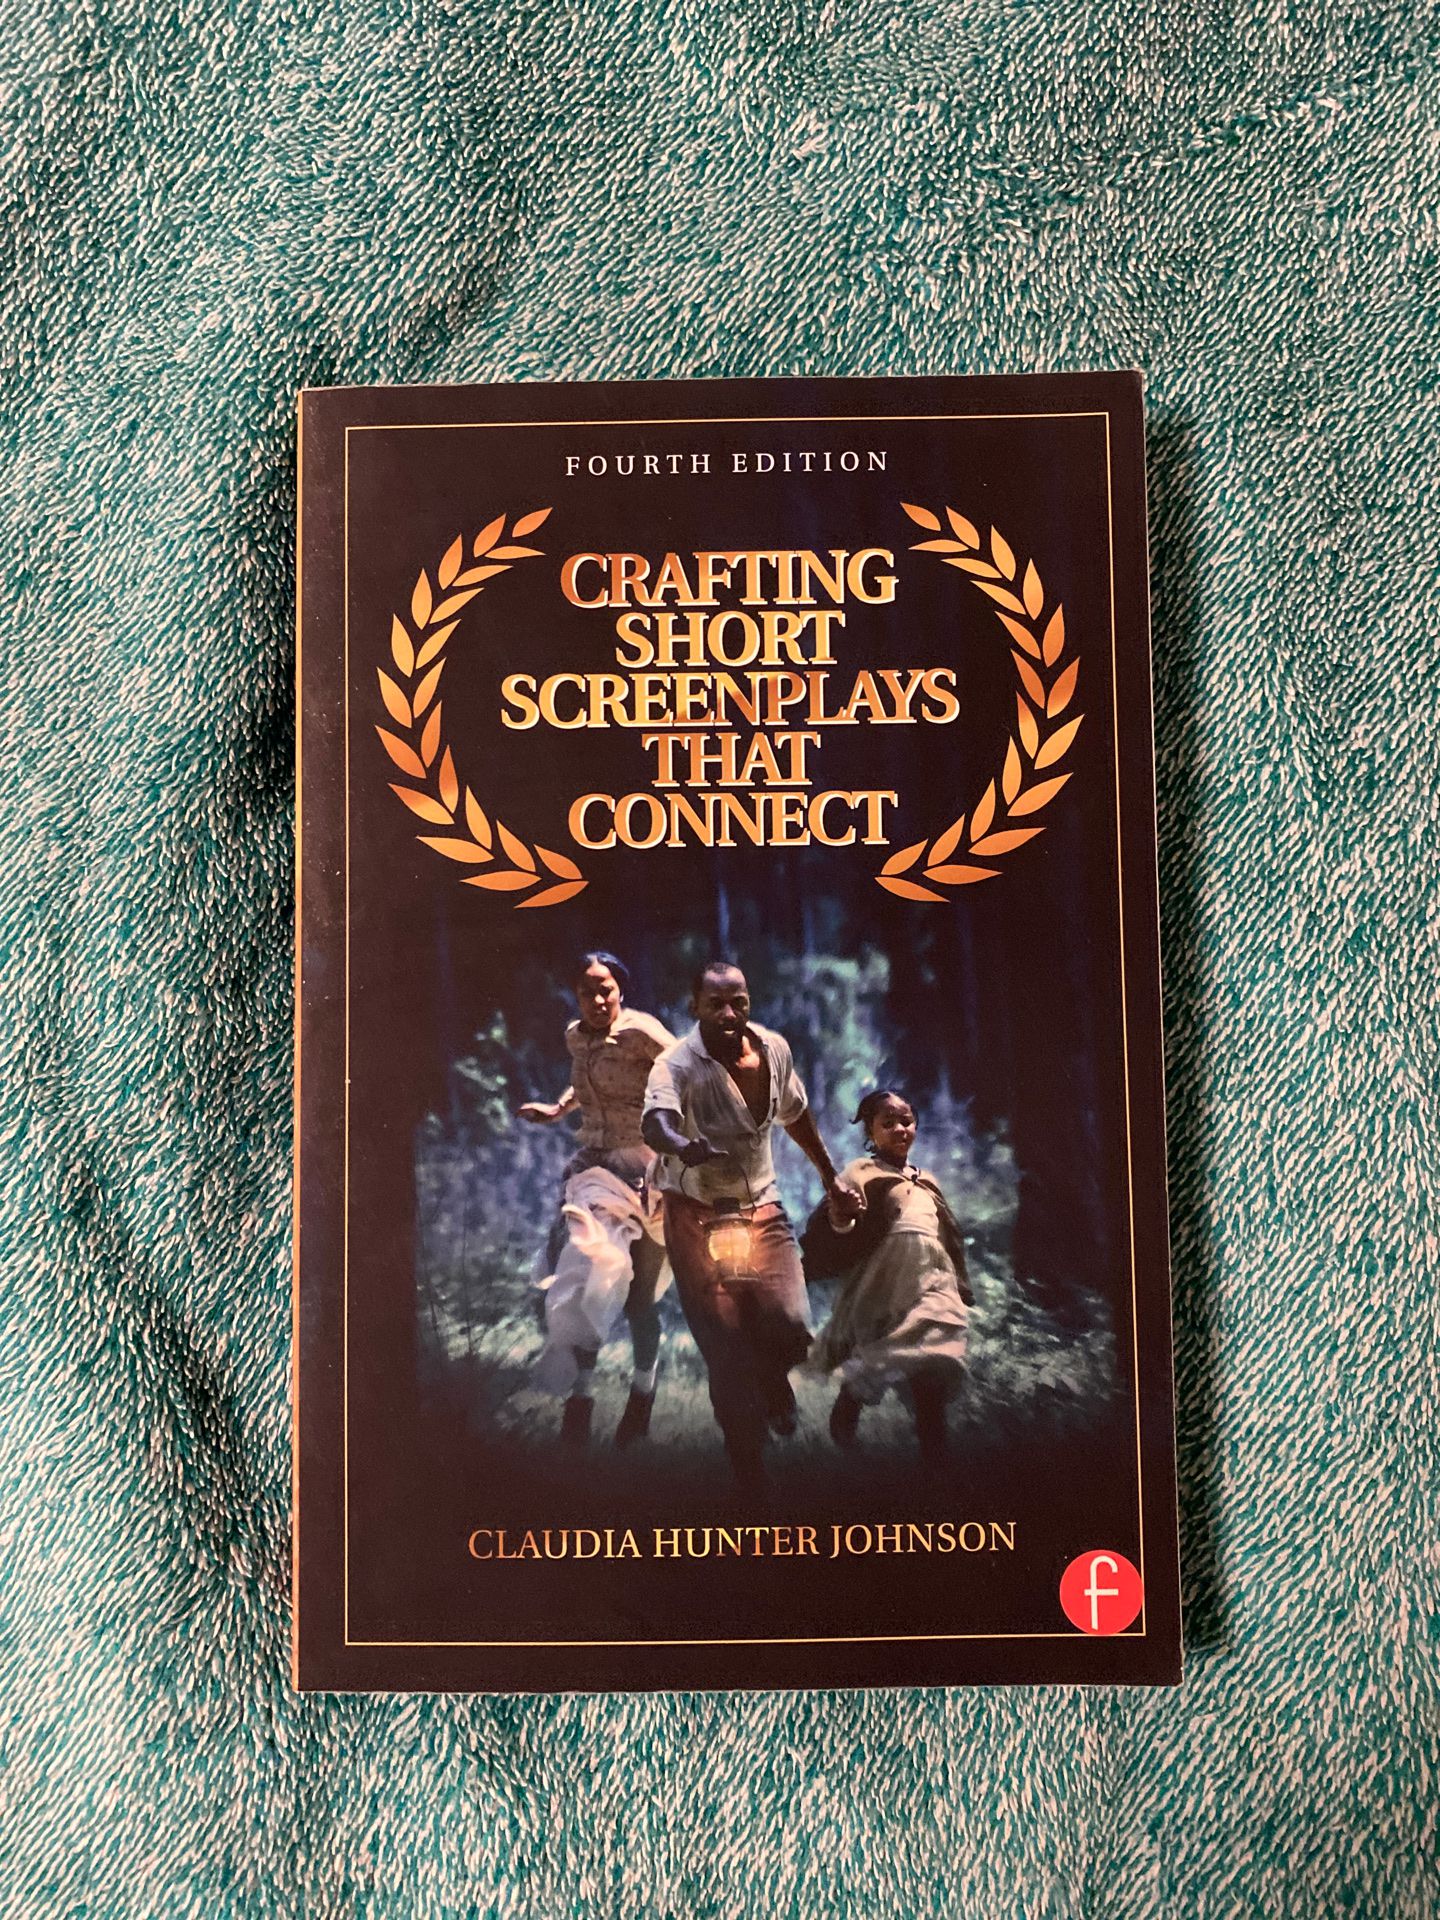 Crafting Short Screenplays that Connect by Claudia Hunter Johnson